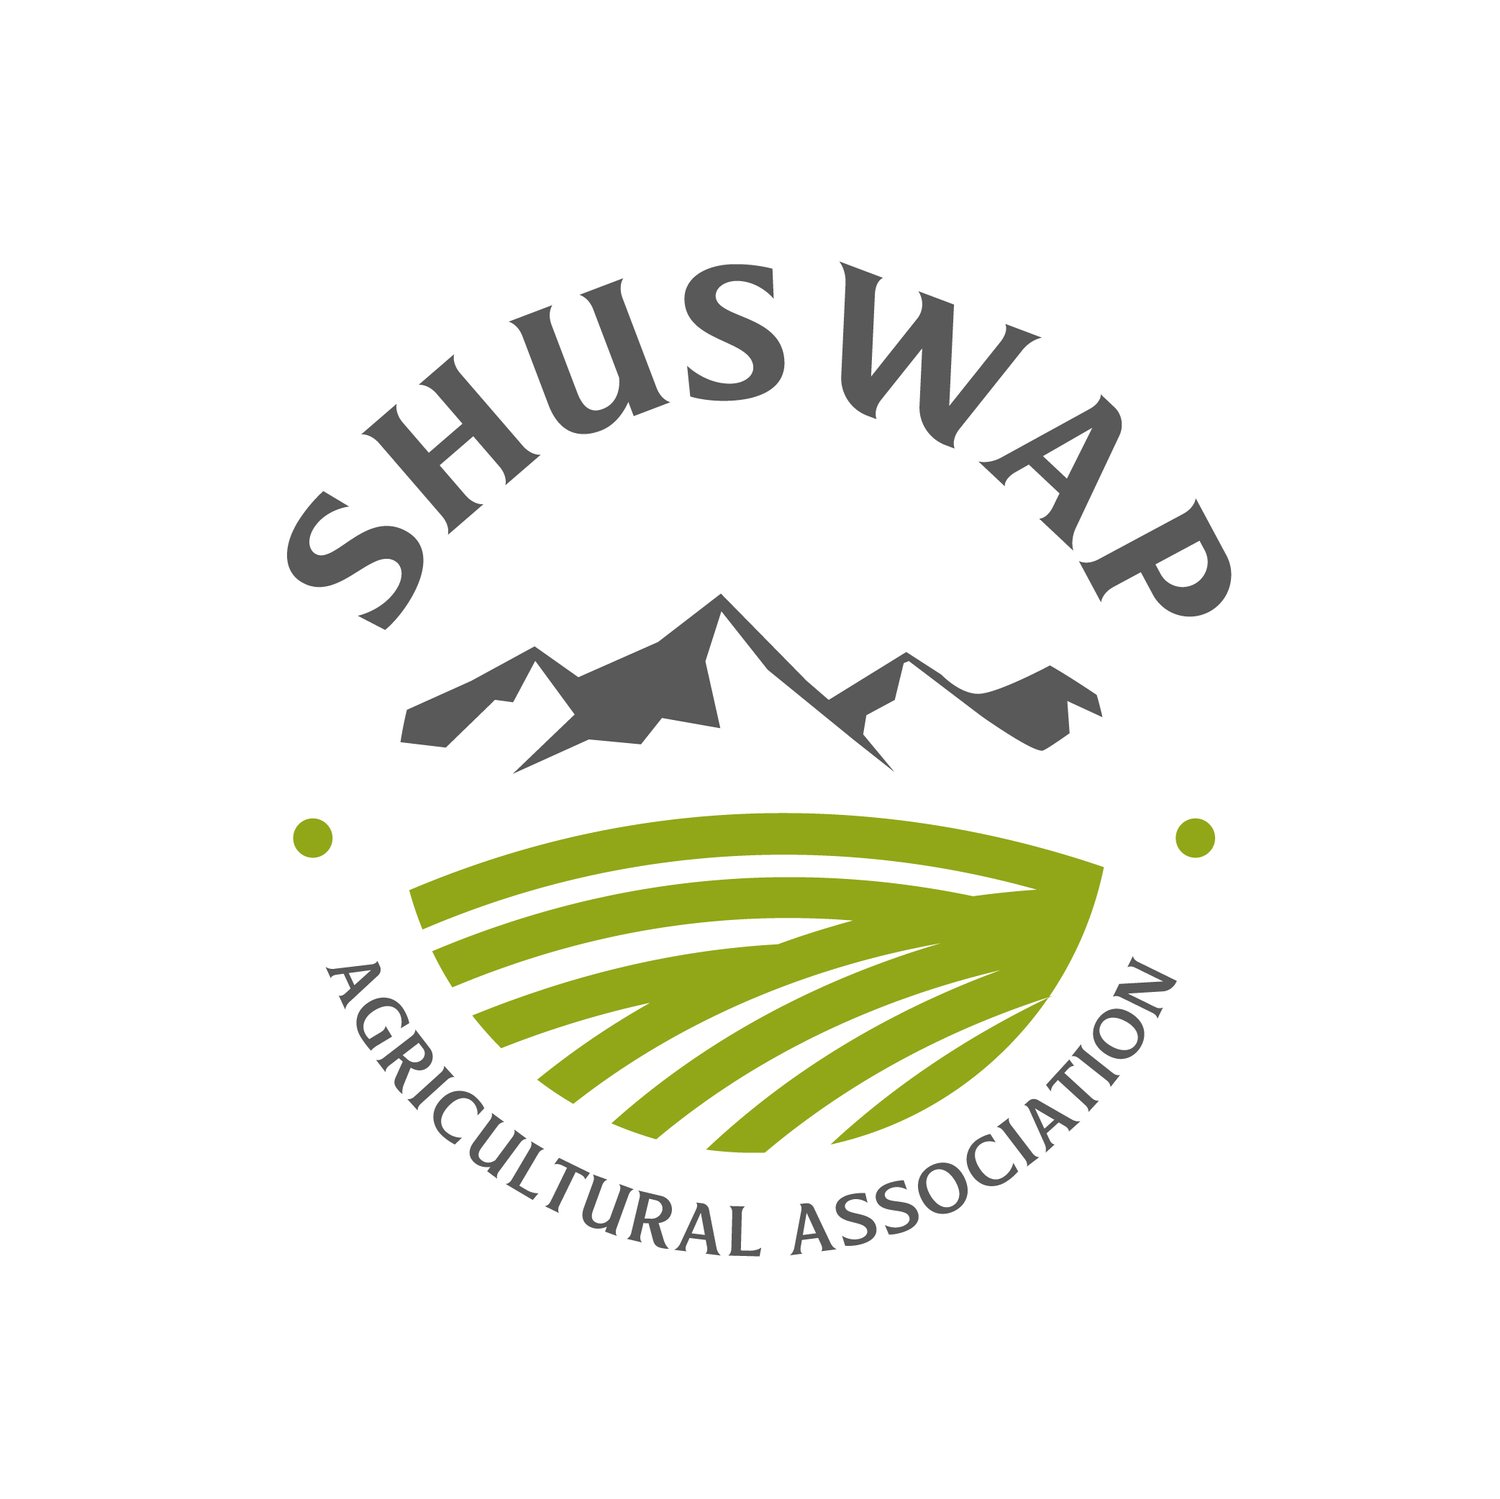 Salmon Arm And Shuswap Agricultural Association